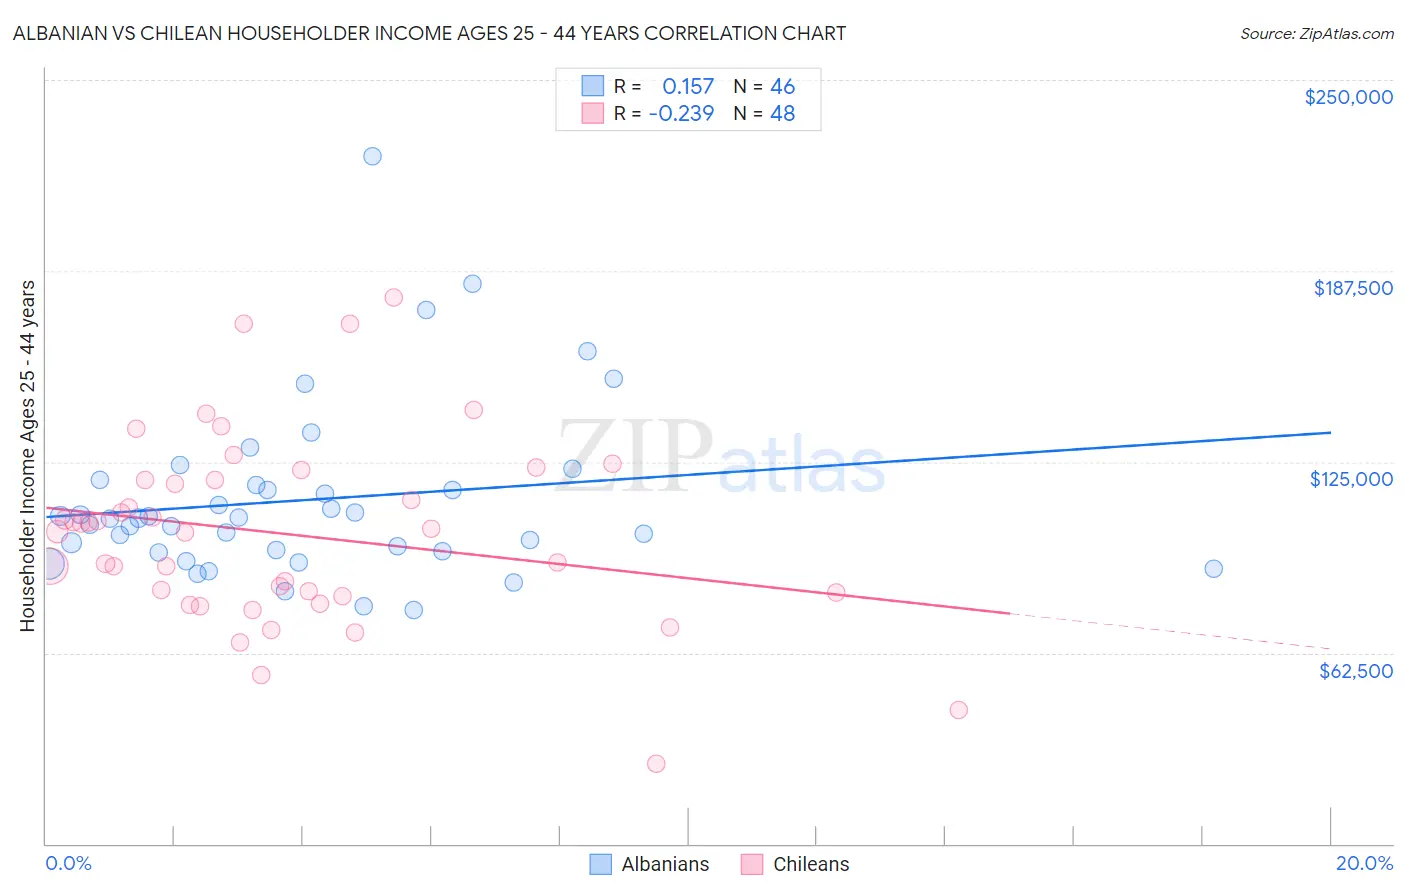 Albanian vs Chilean Householder Income Ages 25 - 44 years